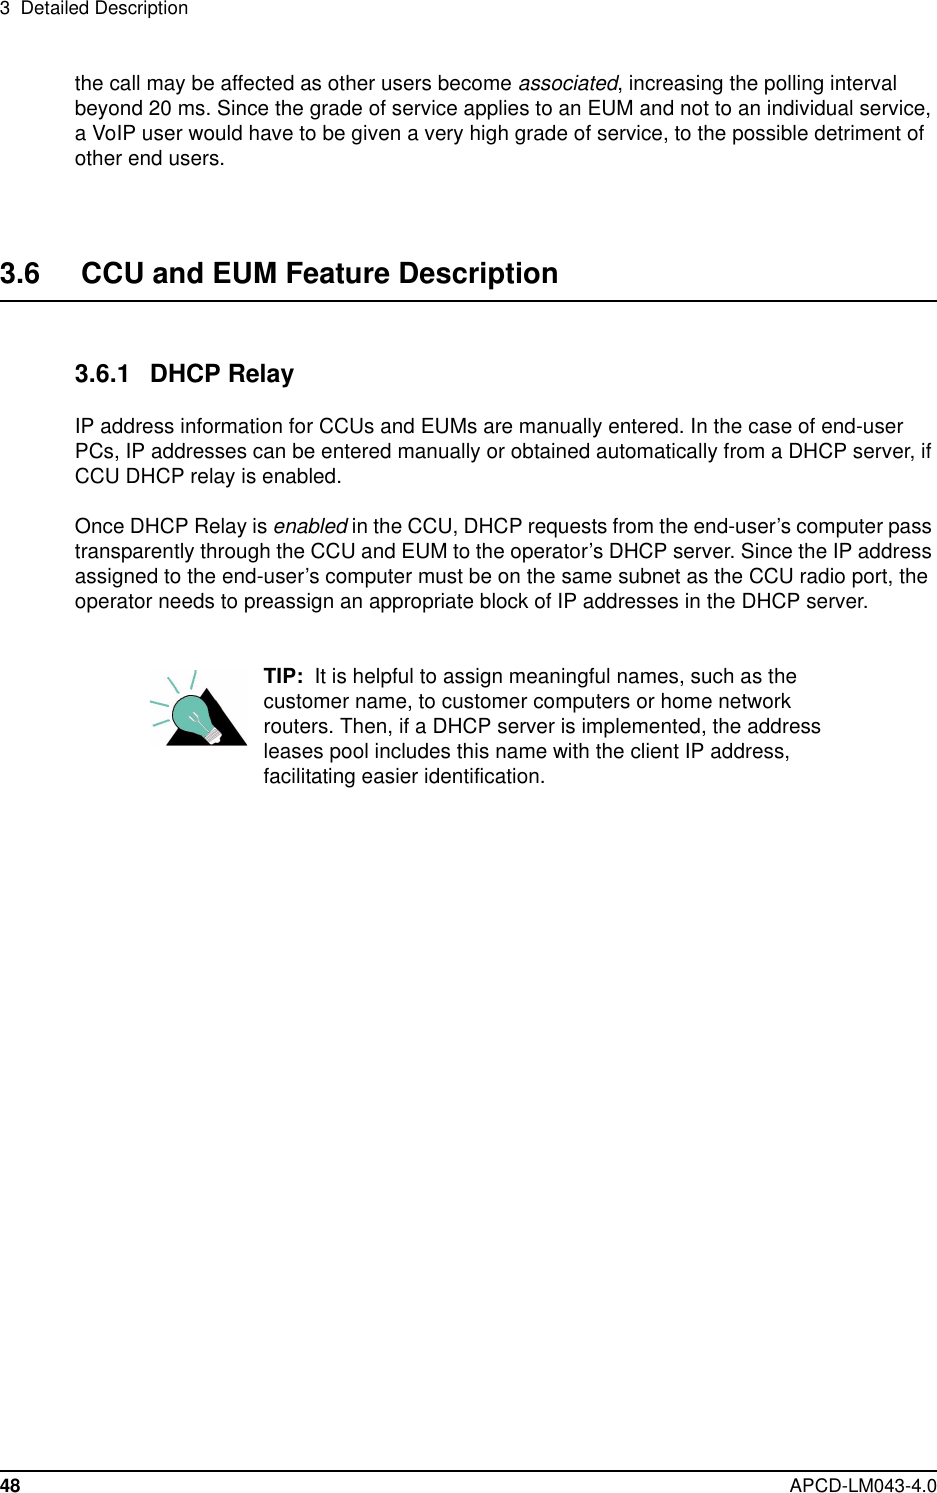 3 Detailed Description48 APCD-LM043-4.0the call may be affected as other users become associated, increasing the polling intervalbeyond 20 ms. Since the grade of service applies to an EUM and not to an individual service,a VoIP user would have to be given a very high grade of service, to the possible detriment ofother end users.3.6 CCU and EUM Feature Description3.6.1 DHCP RelayIP address information for CCUs and EUMs are manually entered. In the case of end-userPCs, IP addresses can be entered manually or obtained automatically from a DHCP server, ifCCU DHCP relay is enabled.Once DHCP Relay is enabled in the CCU, DHCP requests from the end-user’s computer passtransparently through the CCU and EUM to the operator’s DHCP server. Since the IP addressassigned to the end-user’s computer must be on the same subnet as the CCU radio port, theoperator needs to preassign an appropriate block of IP addresses in the DHCP server.TIP: It is helpful to assign meaningful names, such as thecustomer name, to customer computers or home networkrouters. Then, if a DHCP server is implemented, the addressleases pool includes this name with the client IP address,facilitating easier identification.